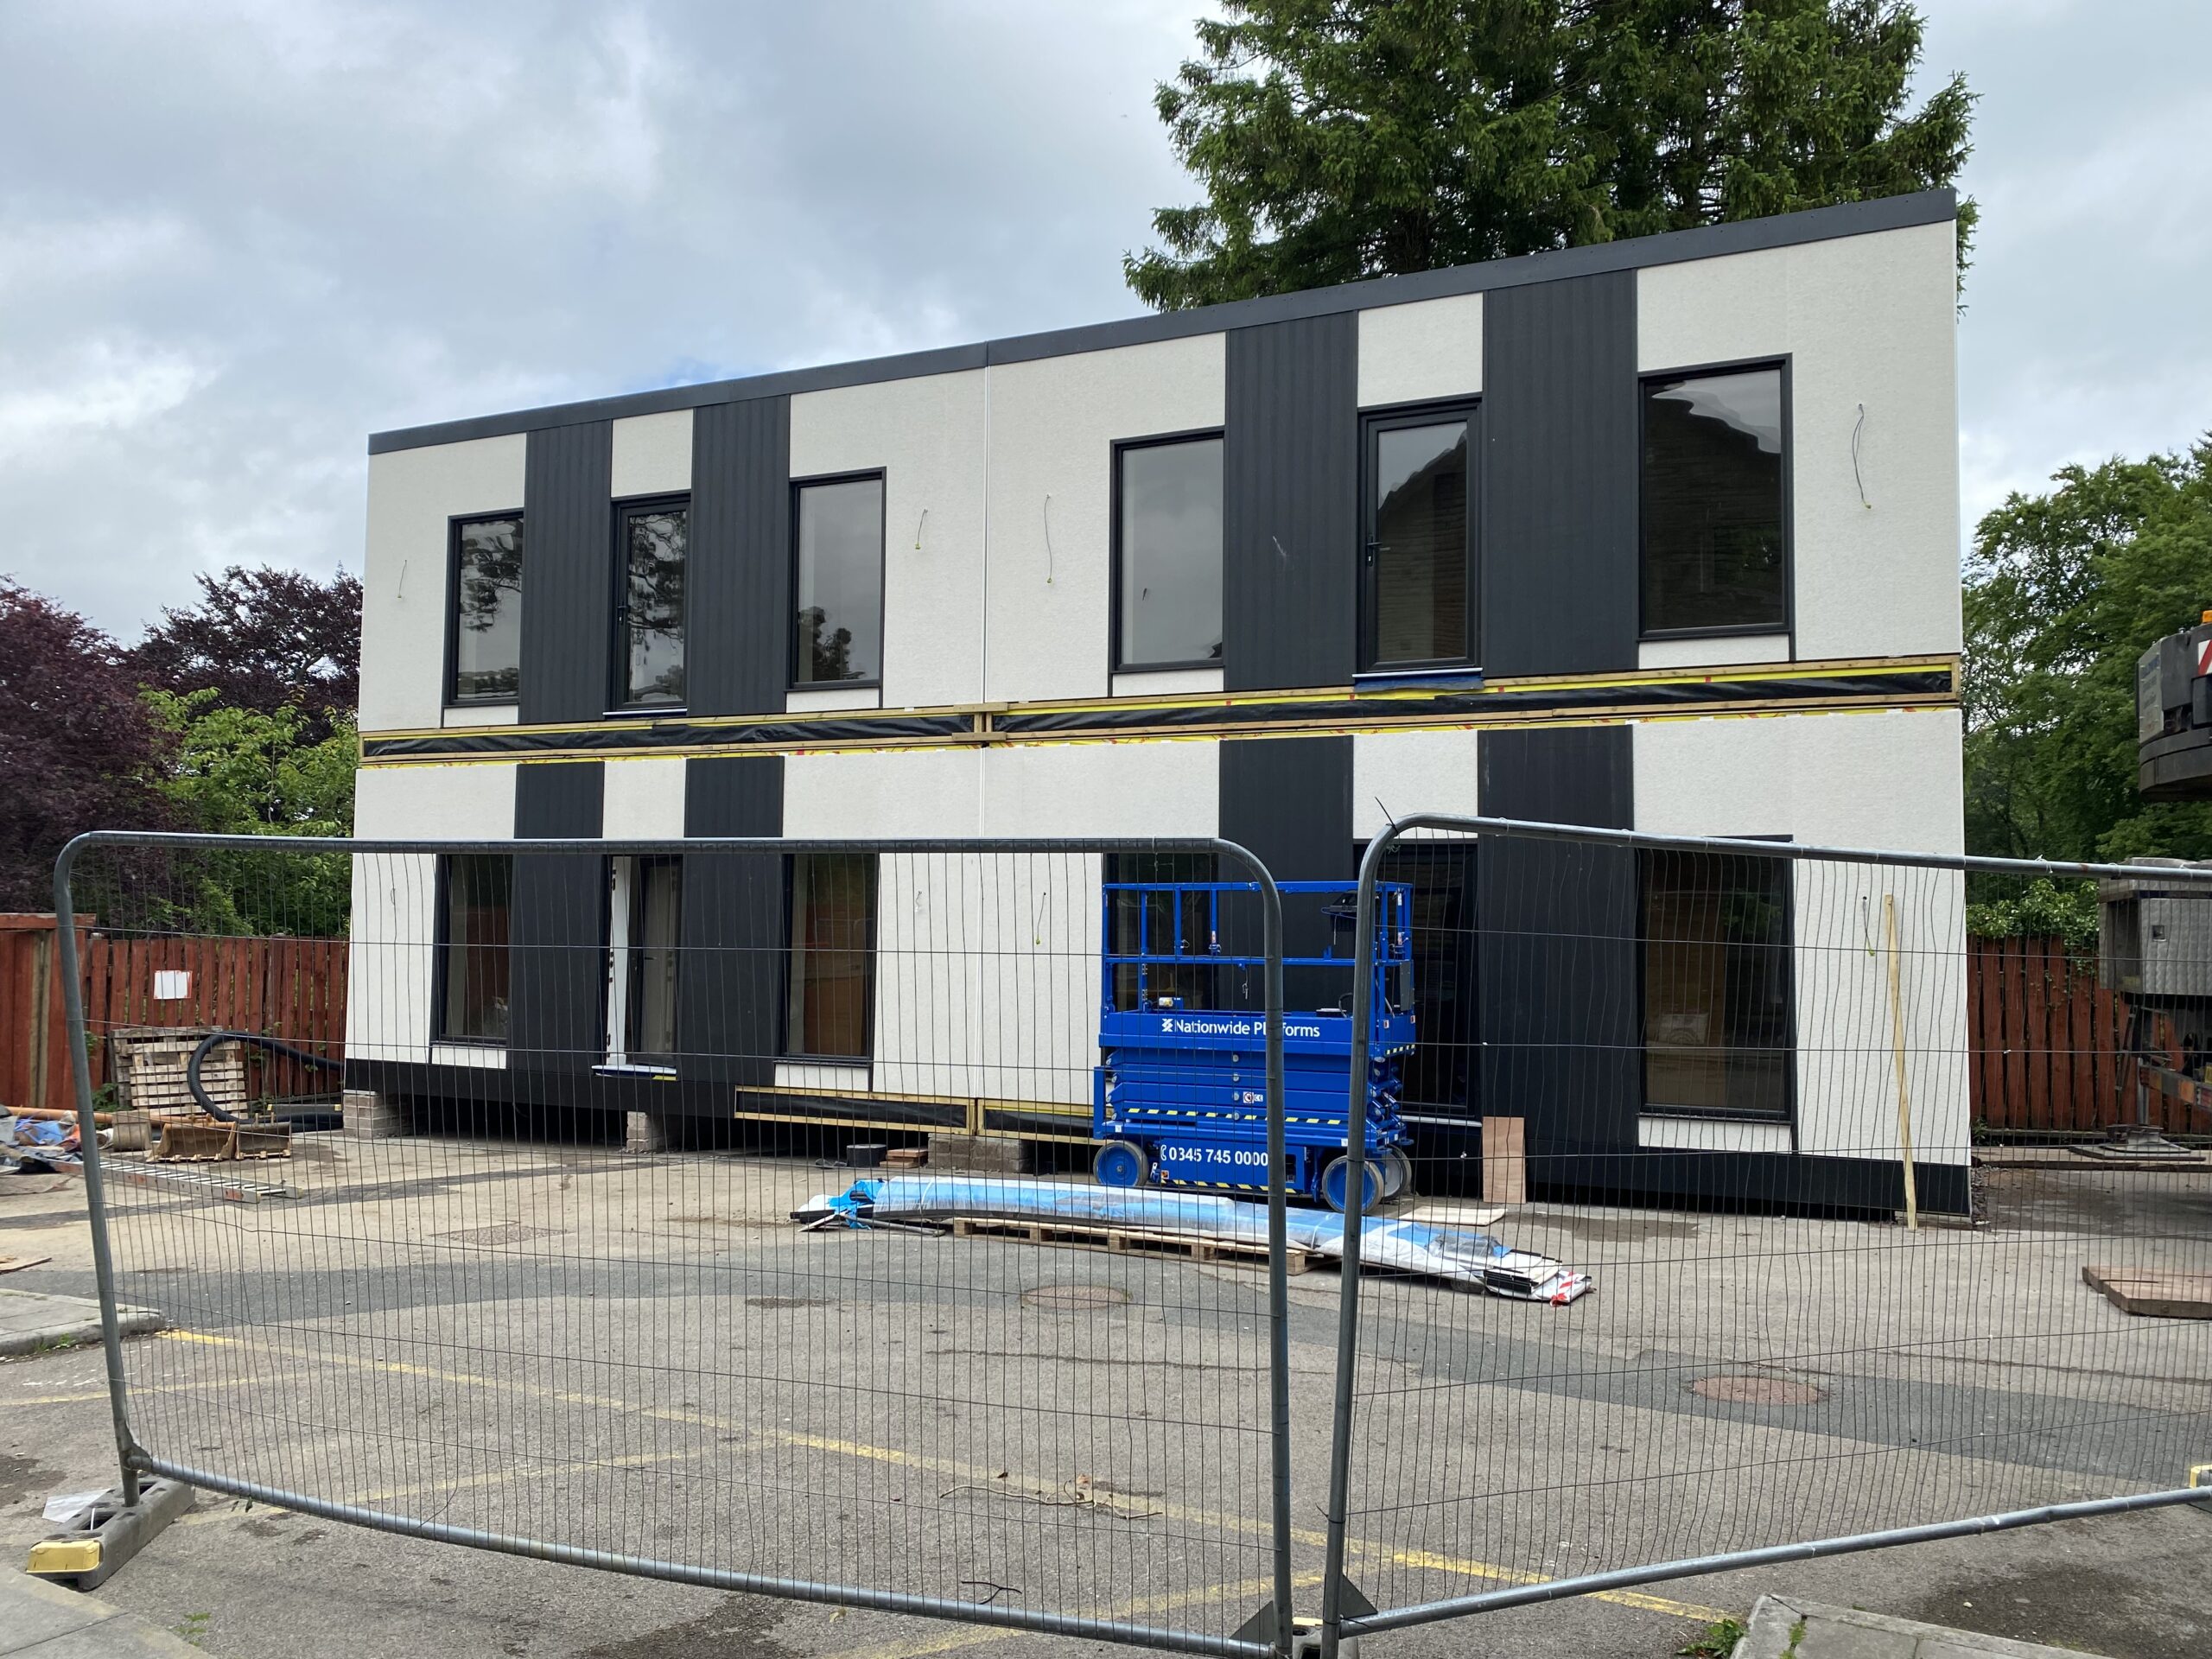 Two semi detached modular build apartments with white walls, large glass windows and black panels with grey metal fencing in front